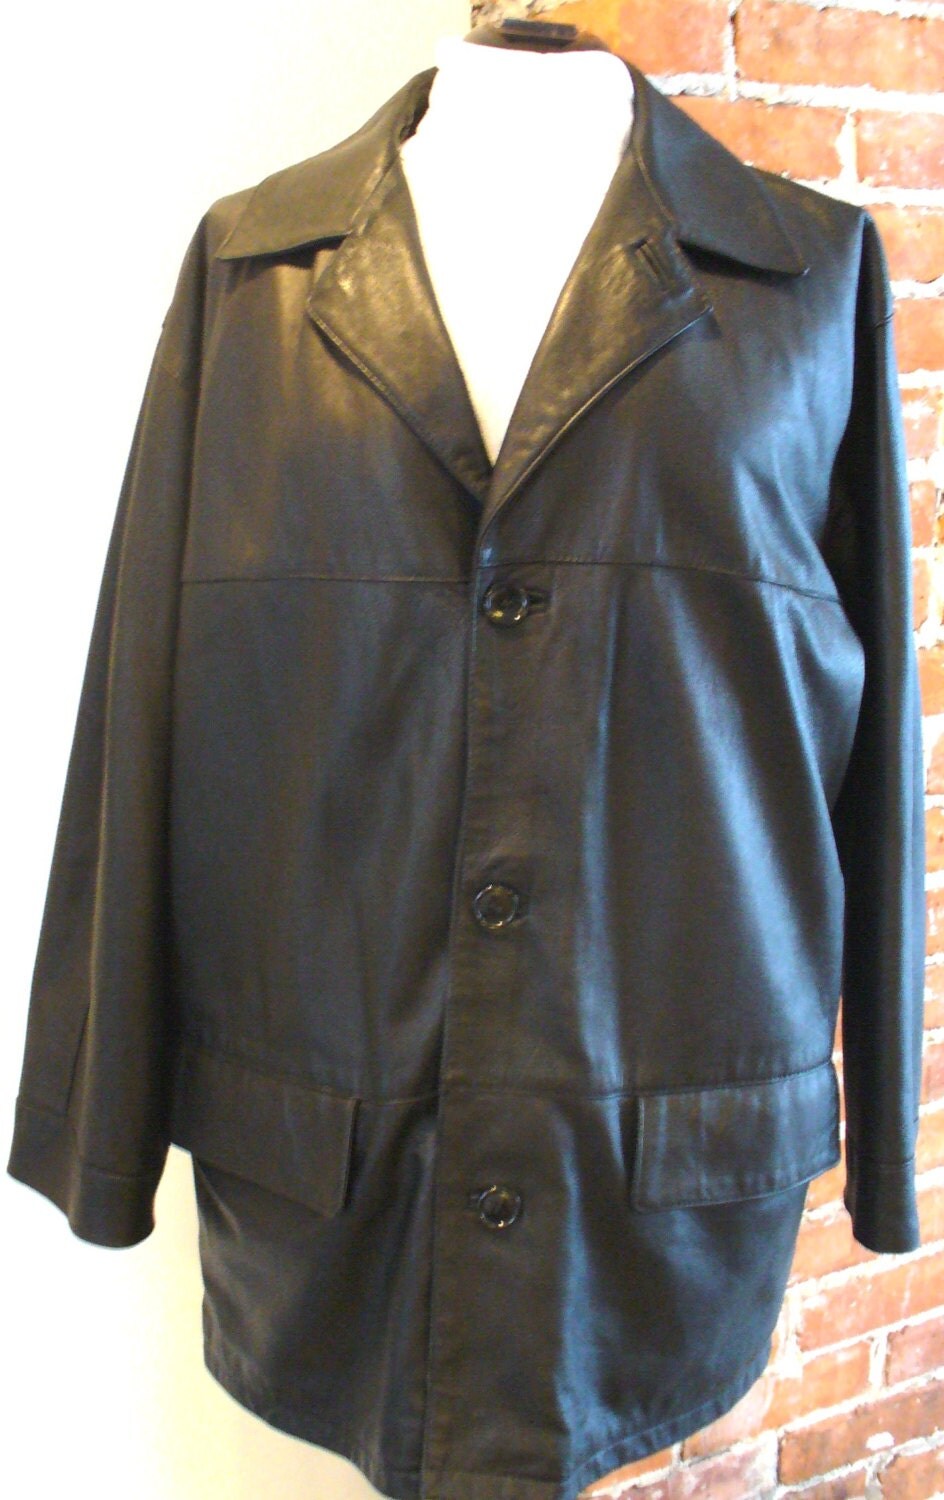 Vera Pelle Made in Italy Men's Classic Leather Jacket